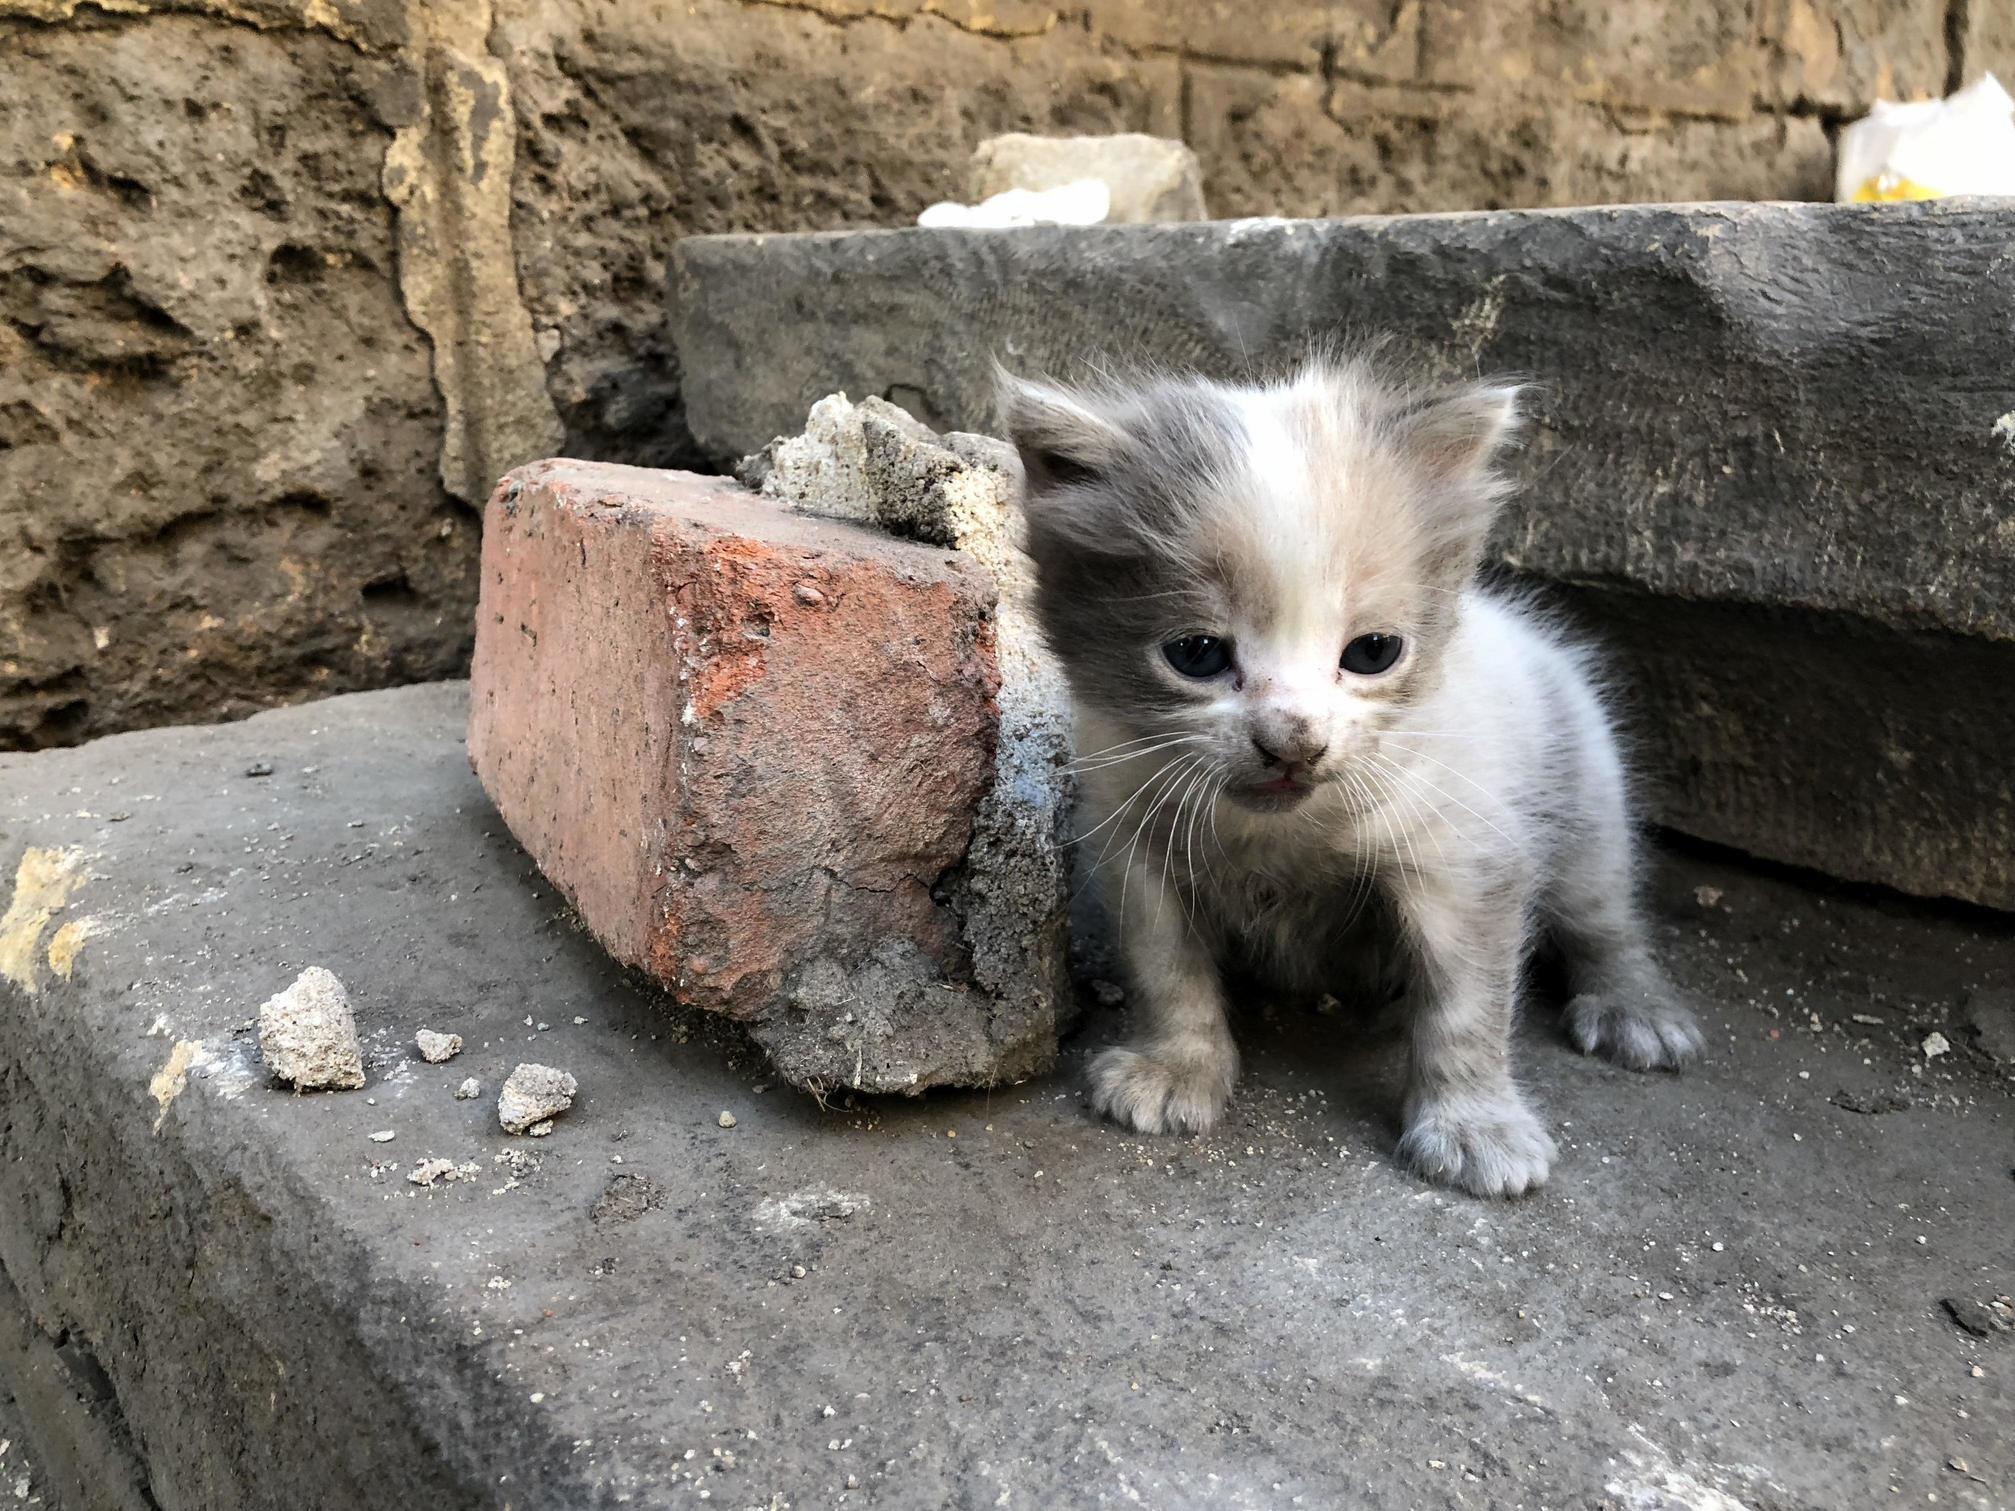 Found this kitten hiding behind a brick on a busy footpath in cairo, egypt